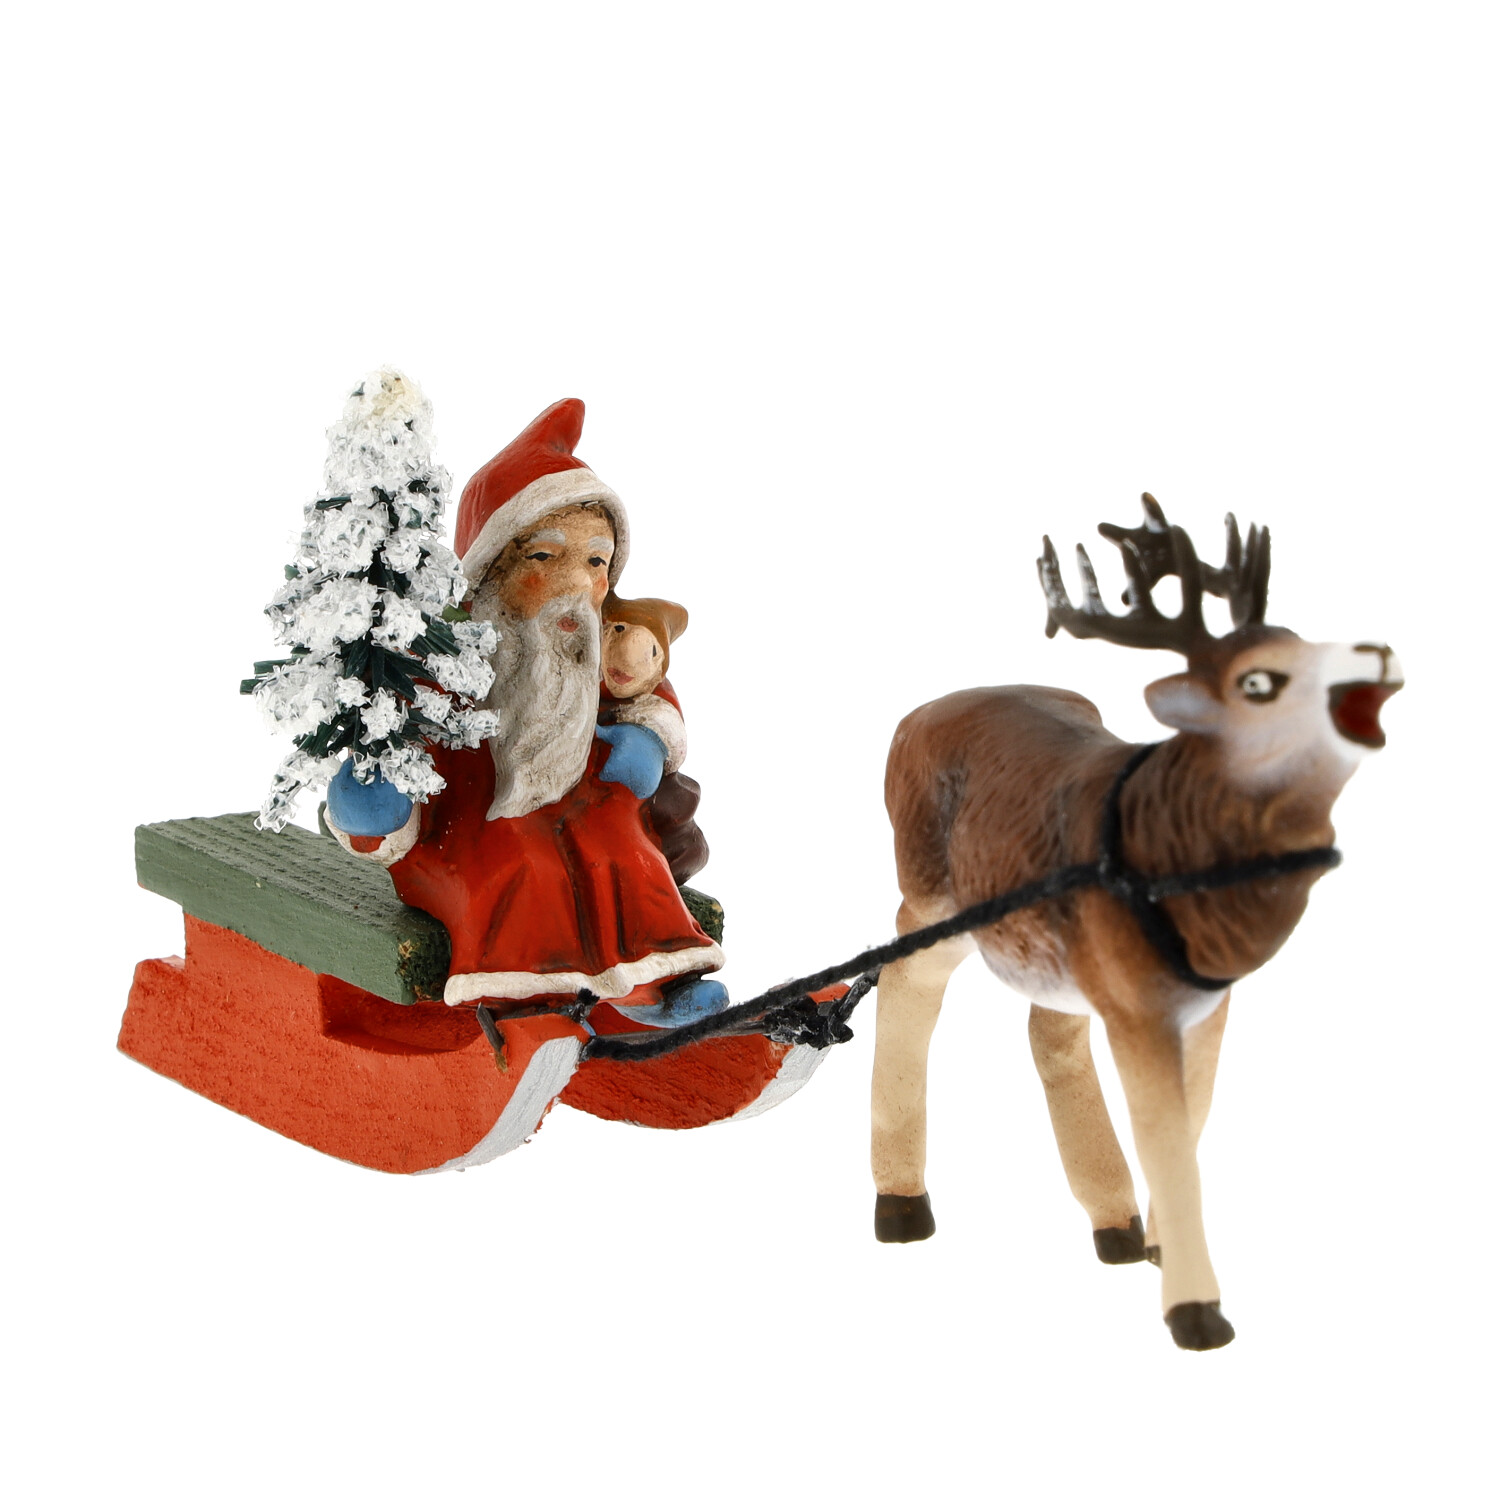 Miniatuer Santa with sled - Marolin Papermaché - made in Germany